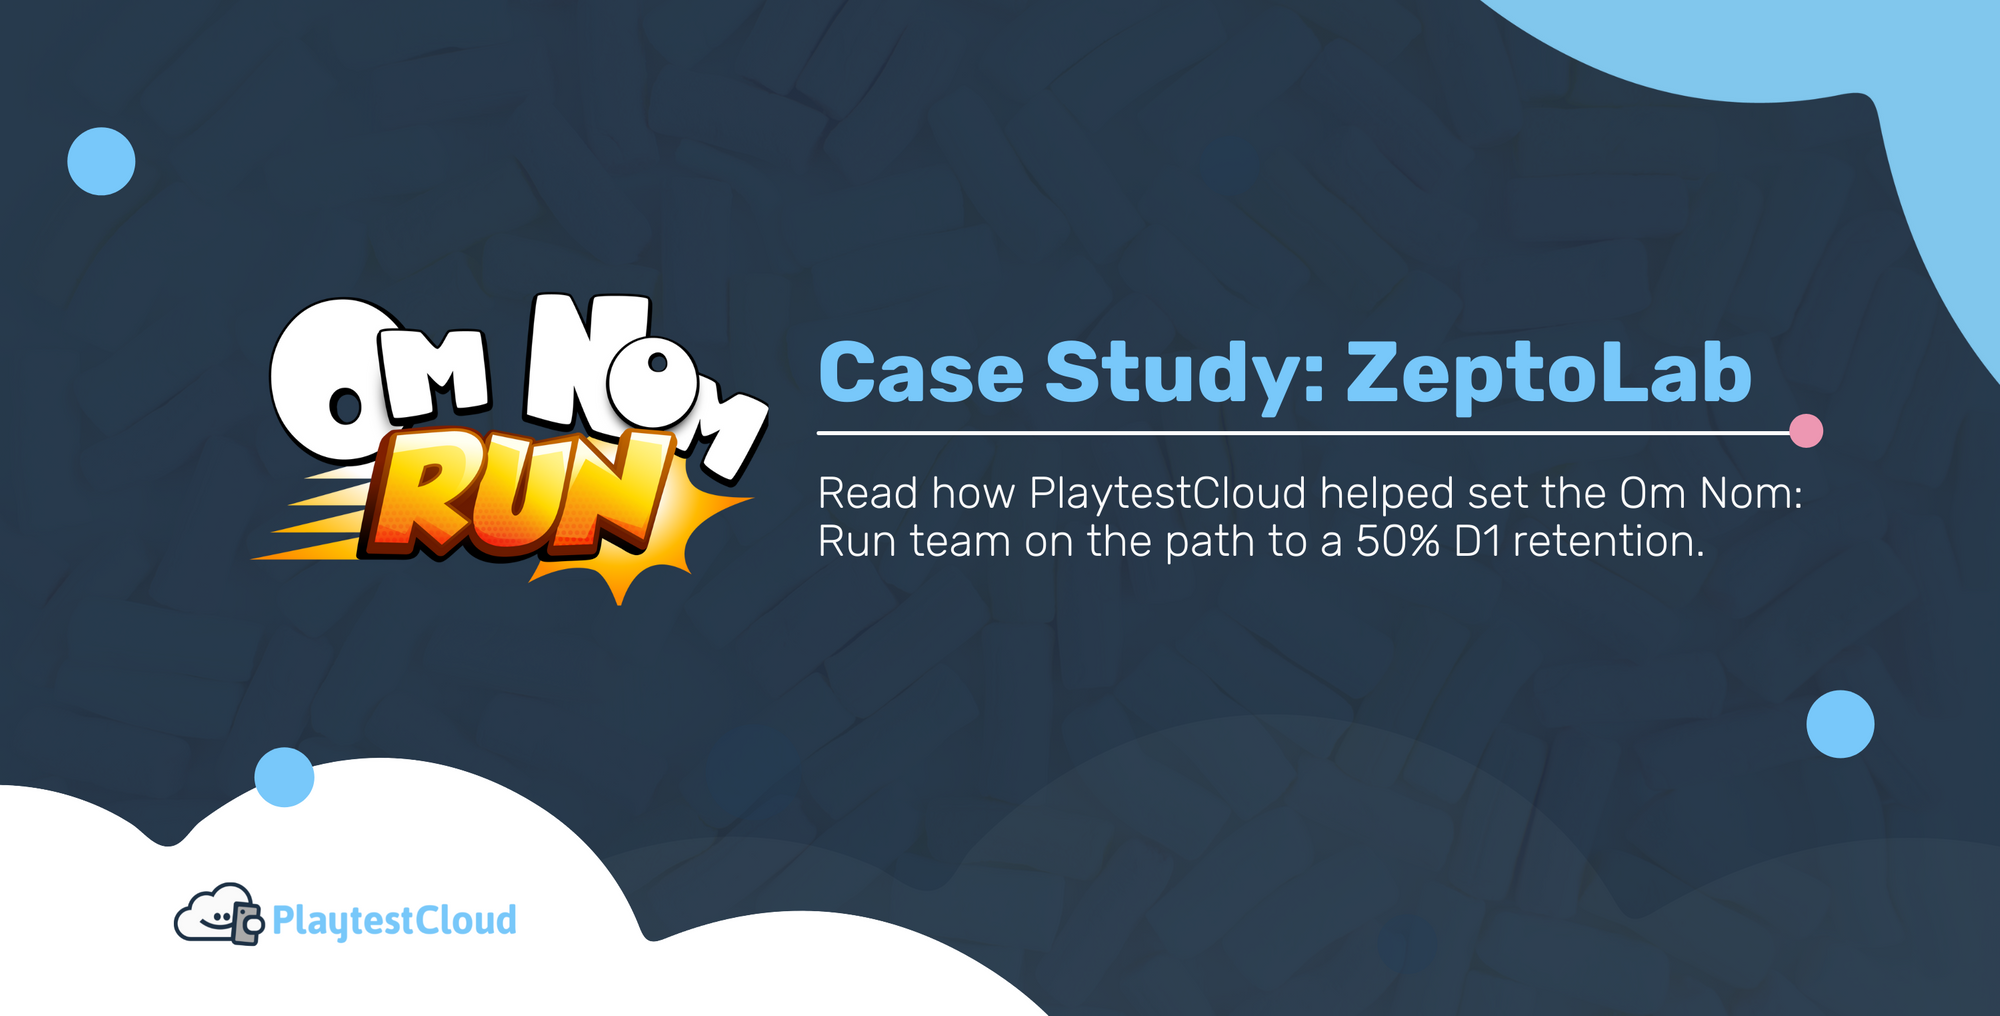 Testing with PlaytestCloud let ZeptoLab perfect the difficulty curve of Om Nom: Run